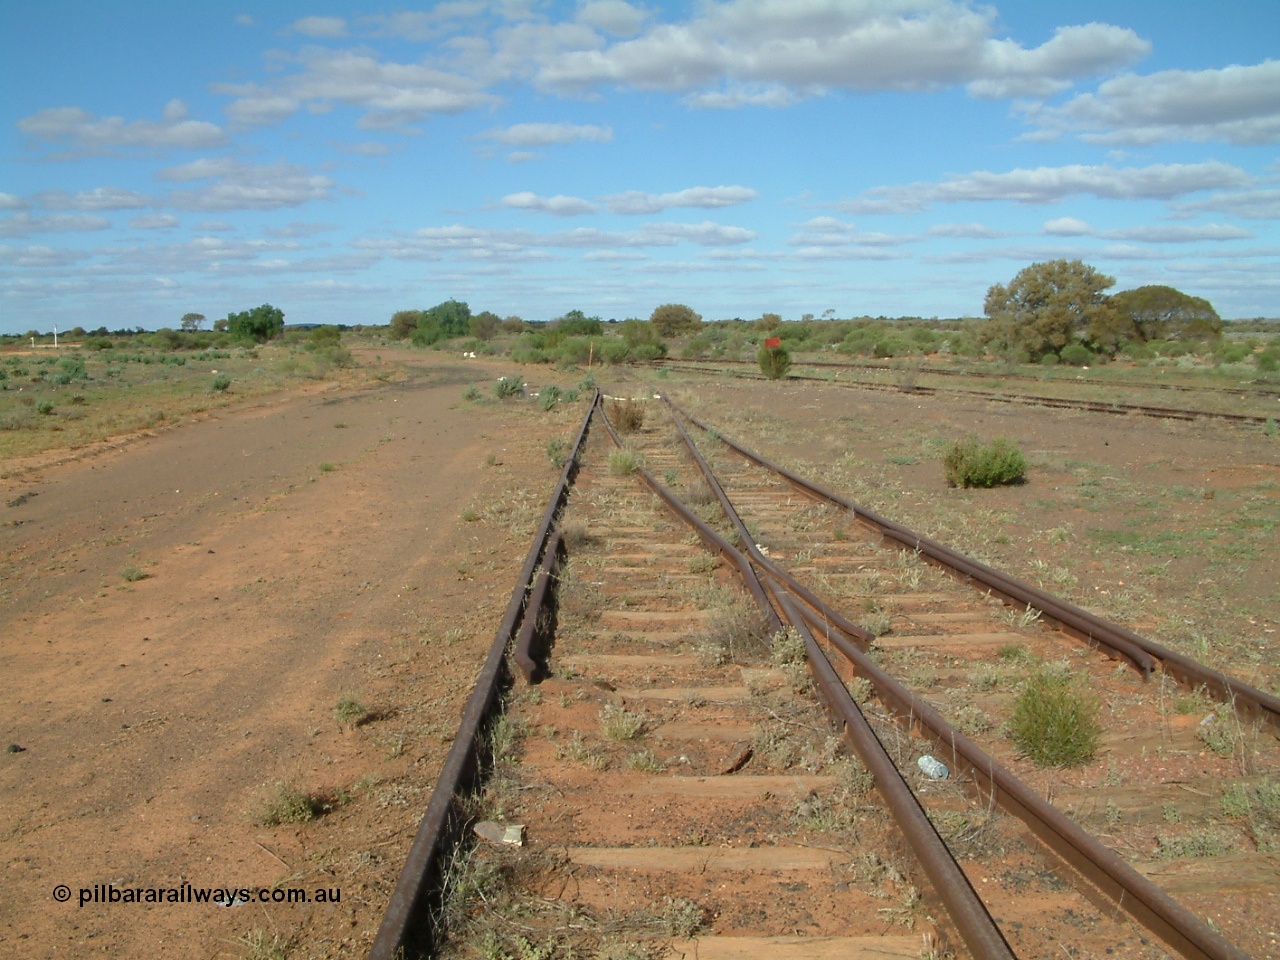 030415 155056
Tarcoola, at the 504.5 km, looking east, end of the Camp Train and No. 1 Loco roads at the points, while No. 2 Loco and No. 1 Water Road curve in from the right, mainline to the left. [url=https://goo.gl/maps/9wxzgiU7GAe9hPjz5]GeoData location[/url]. 15th April 2003.
